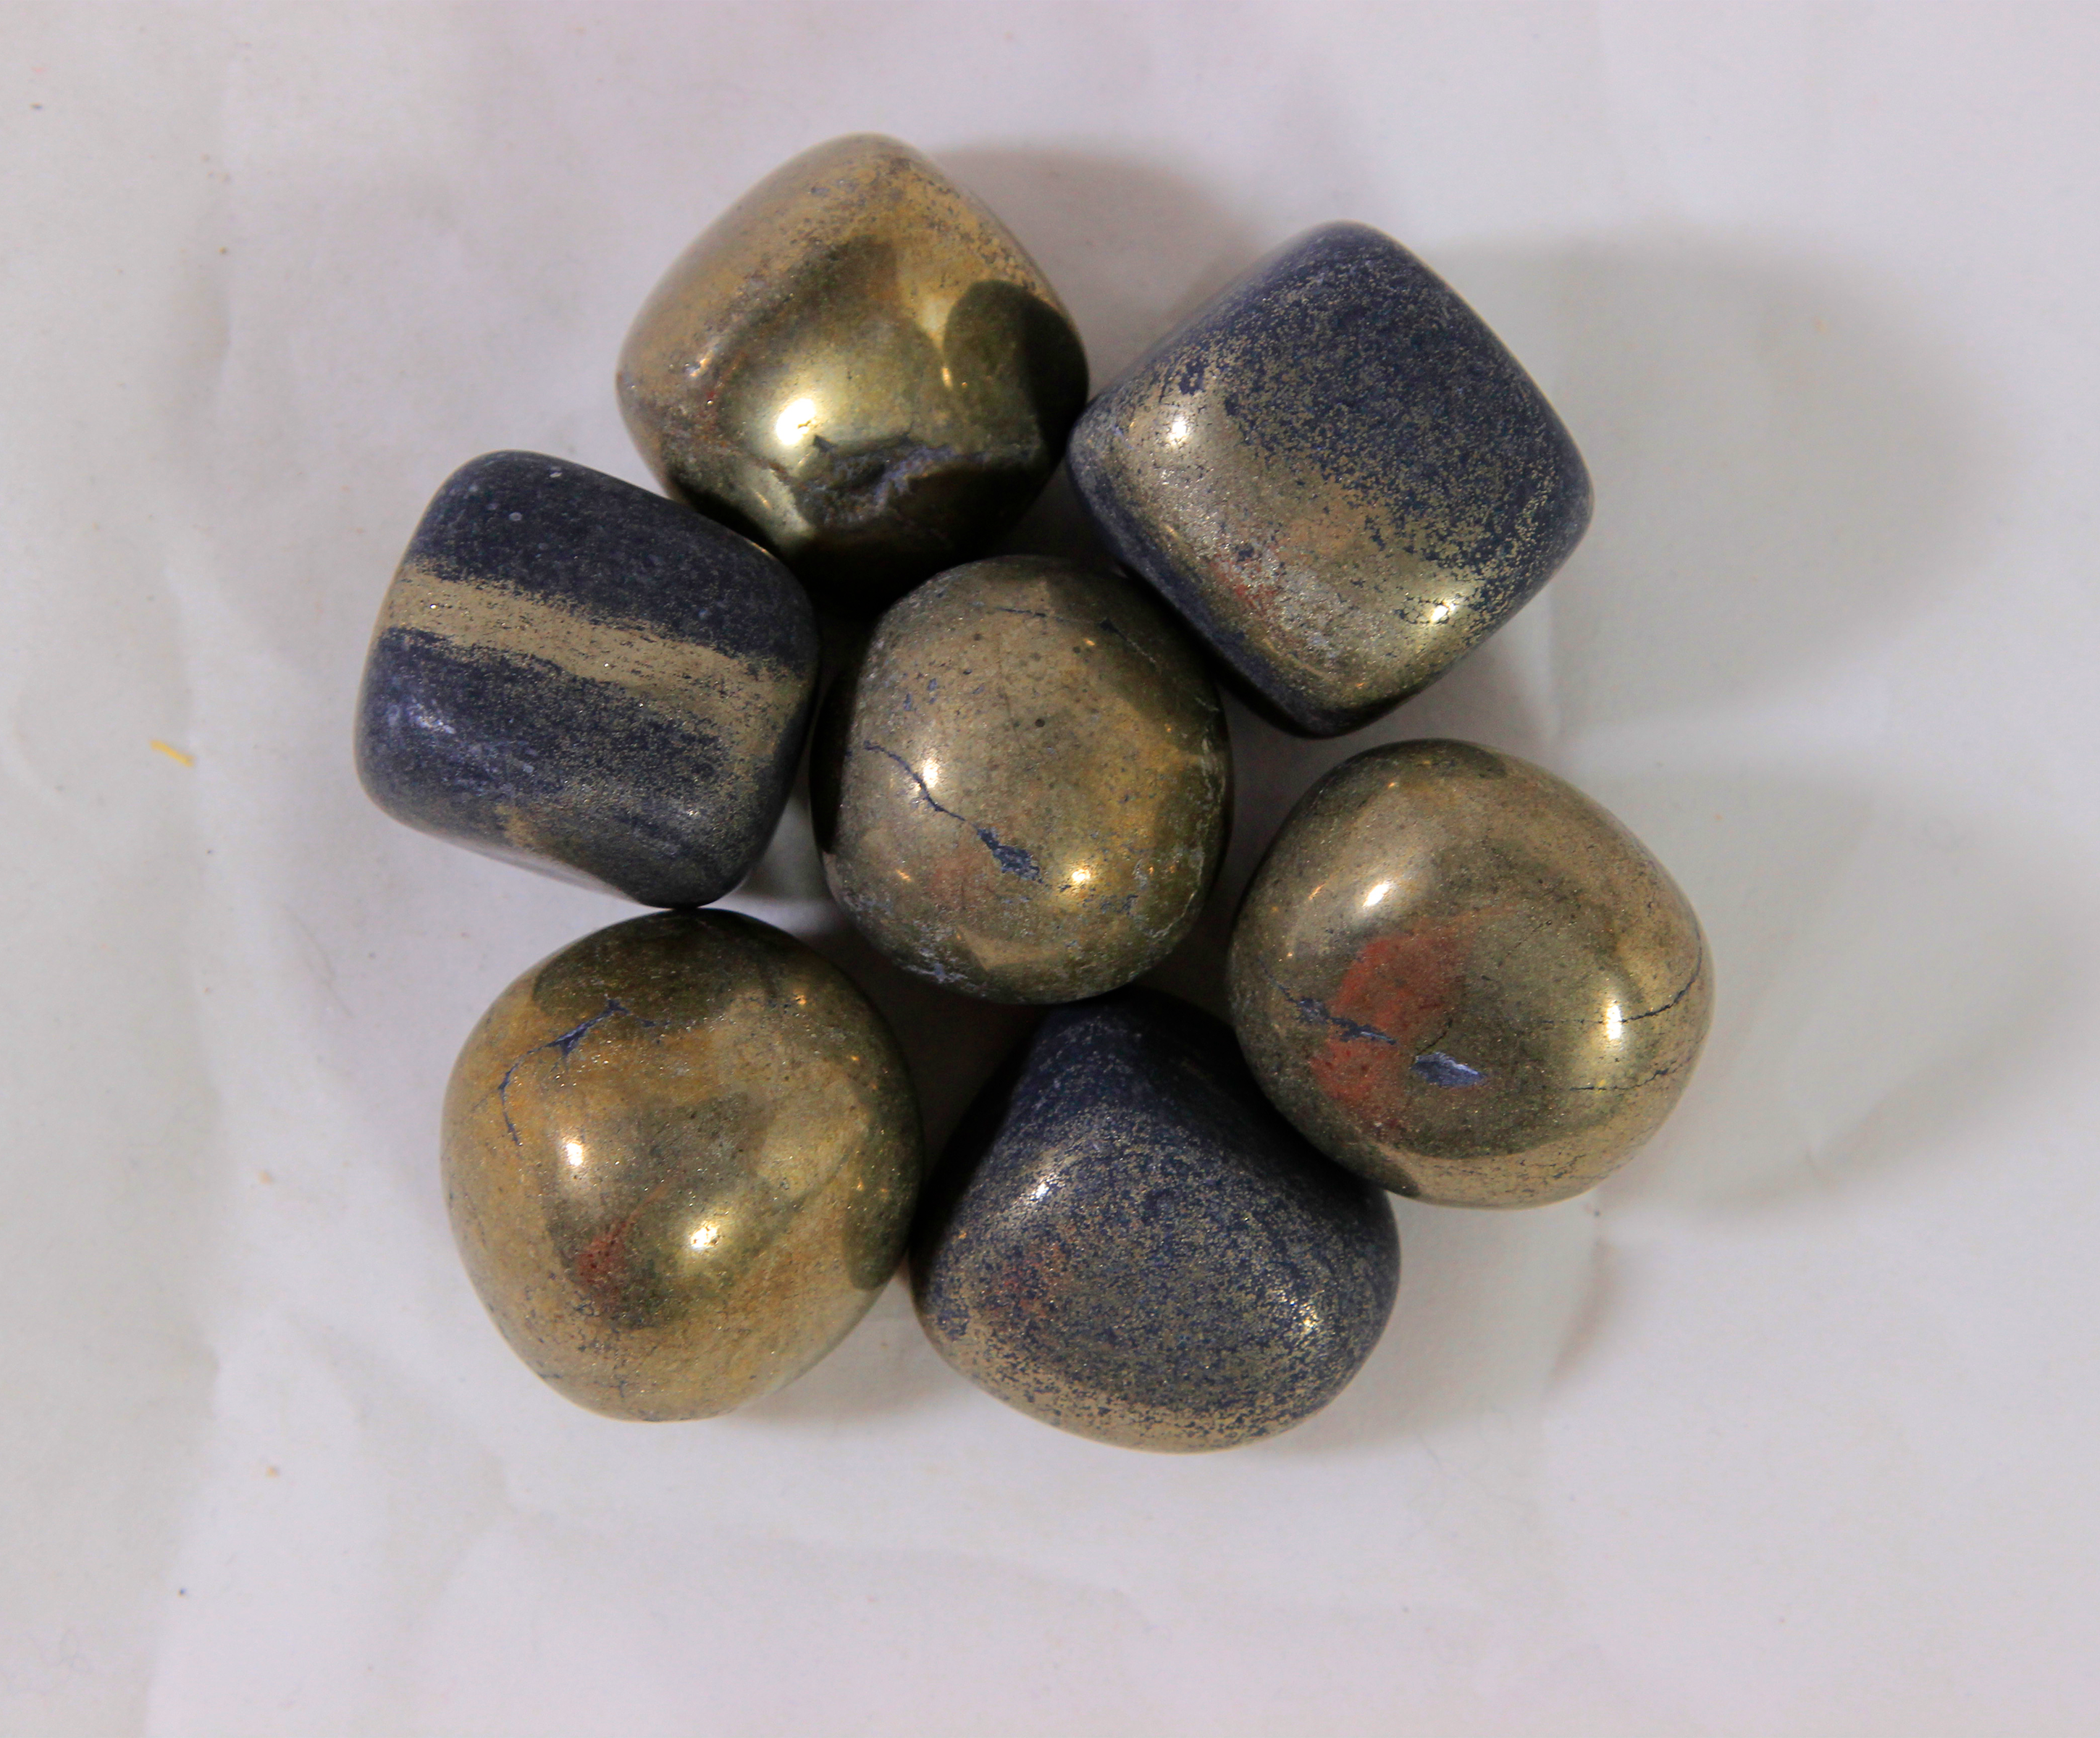 Several Large Pyrite Stones